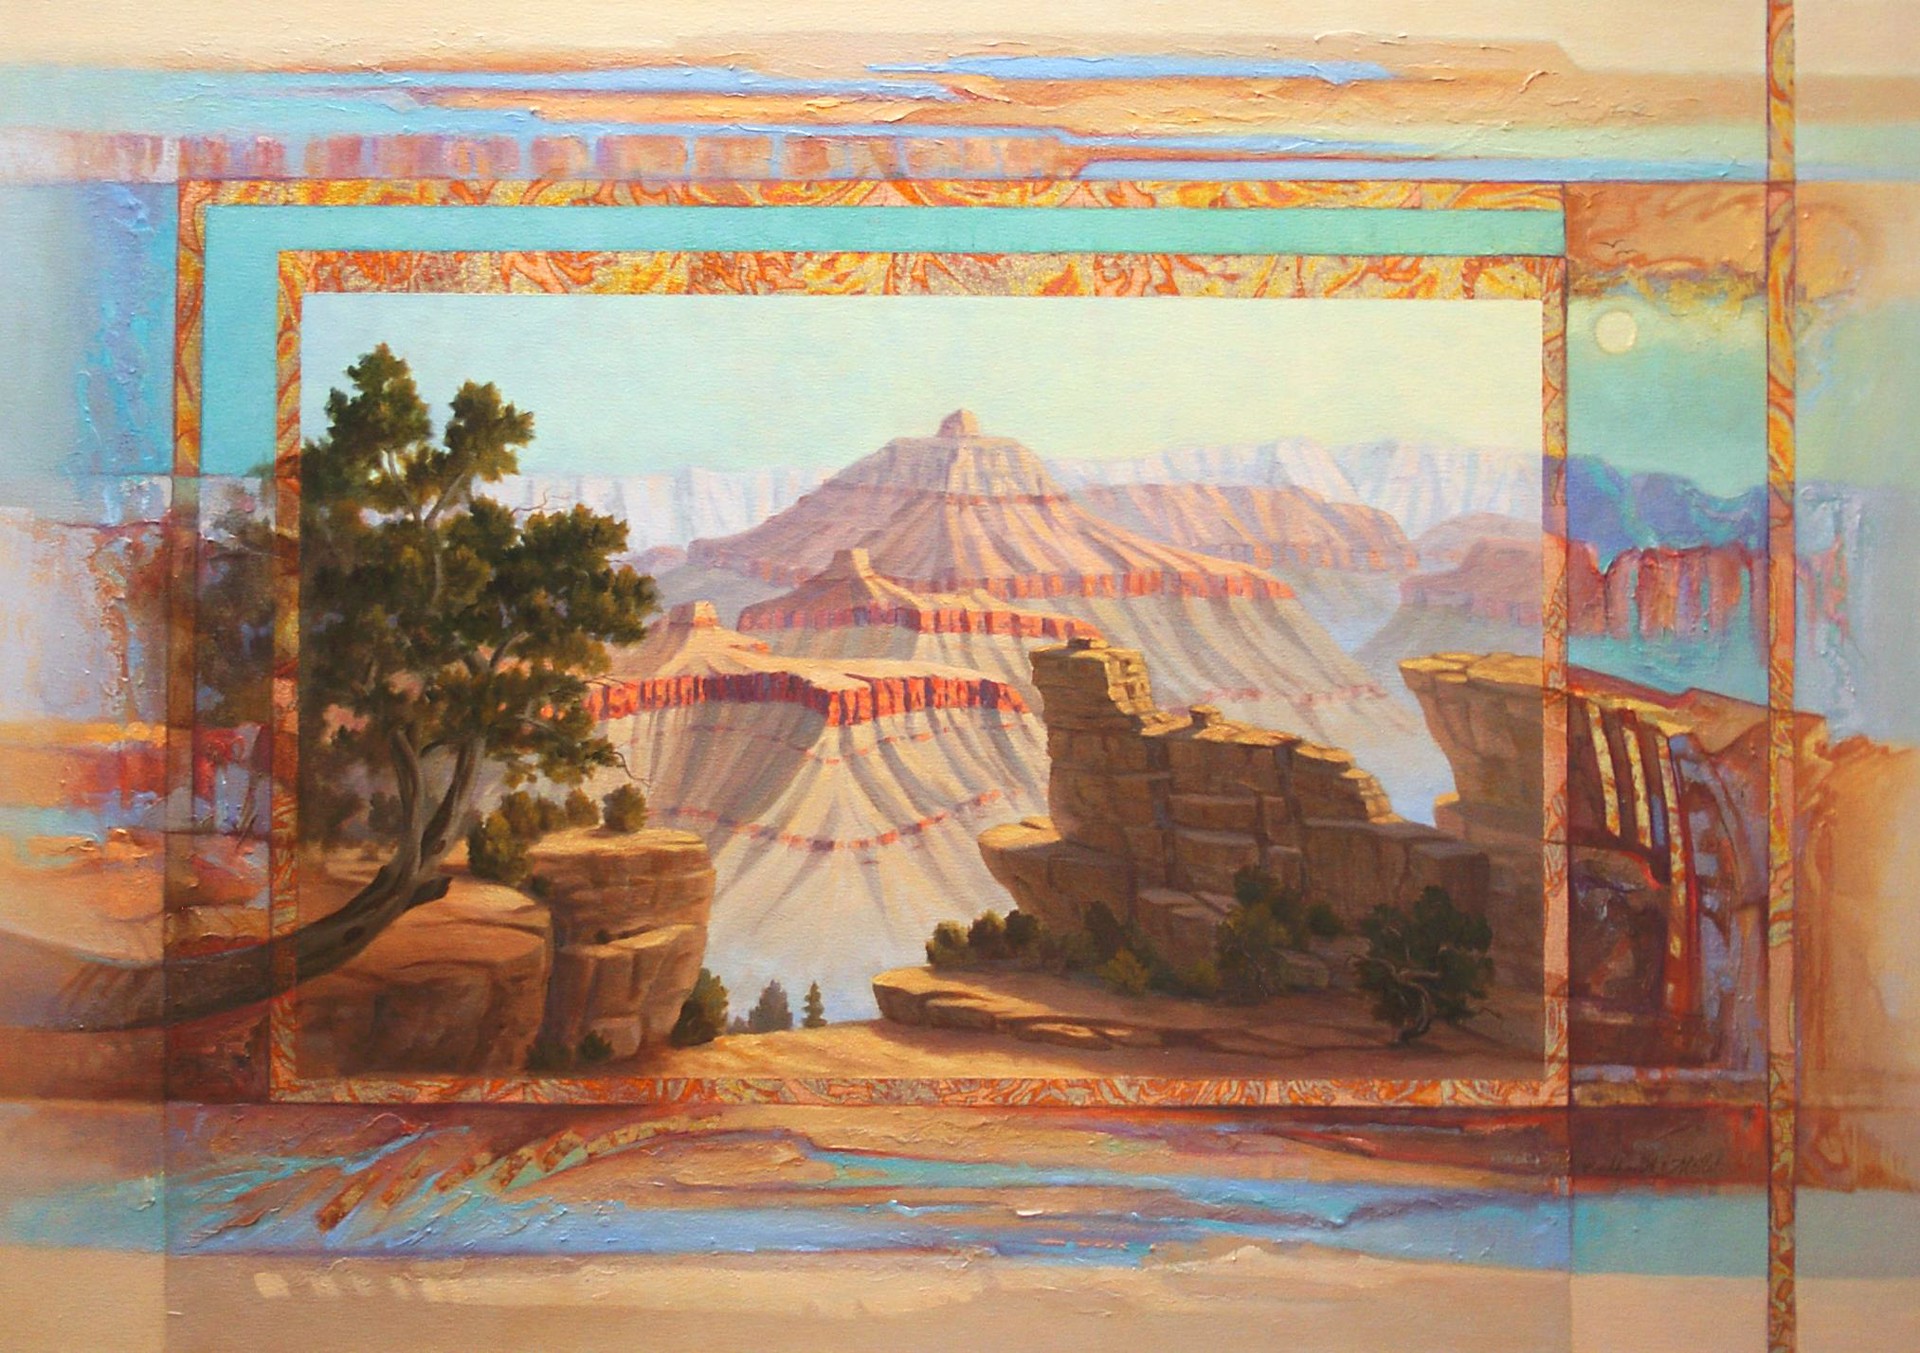 Morning Gentle Light (Grand Canyon) by Marlys Mallét & Michael Redhawk